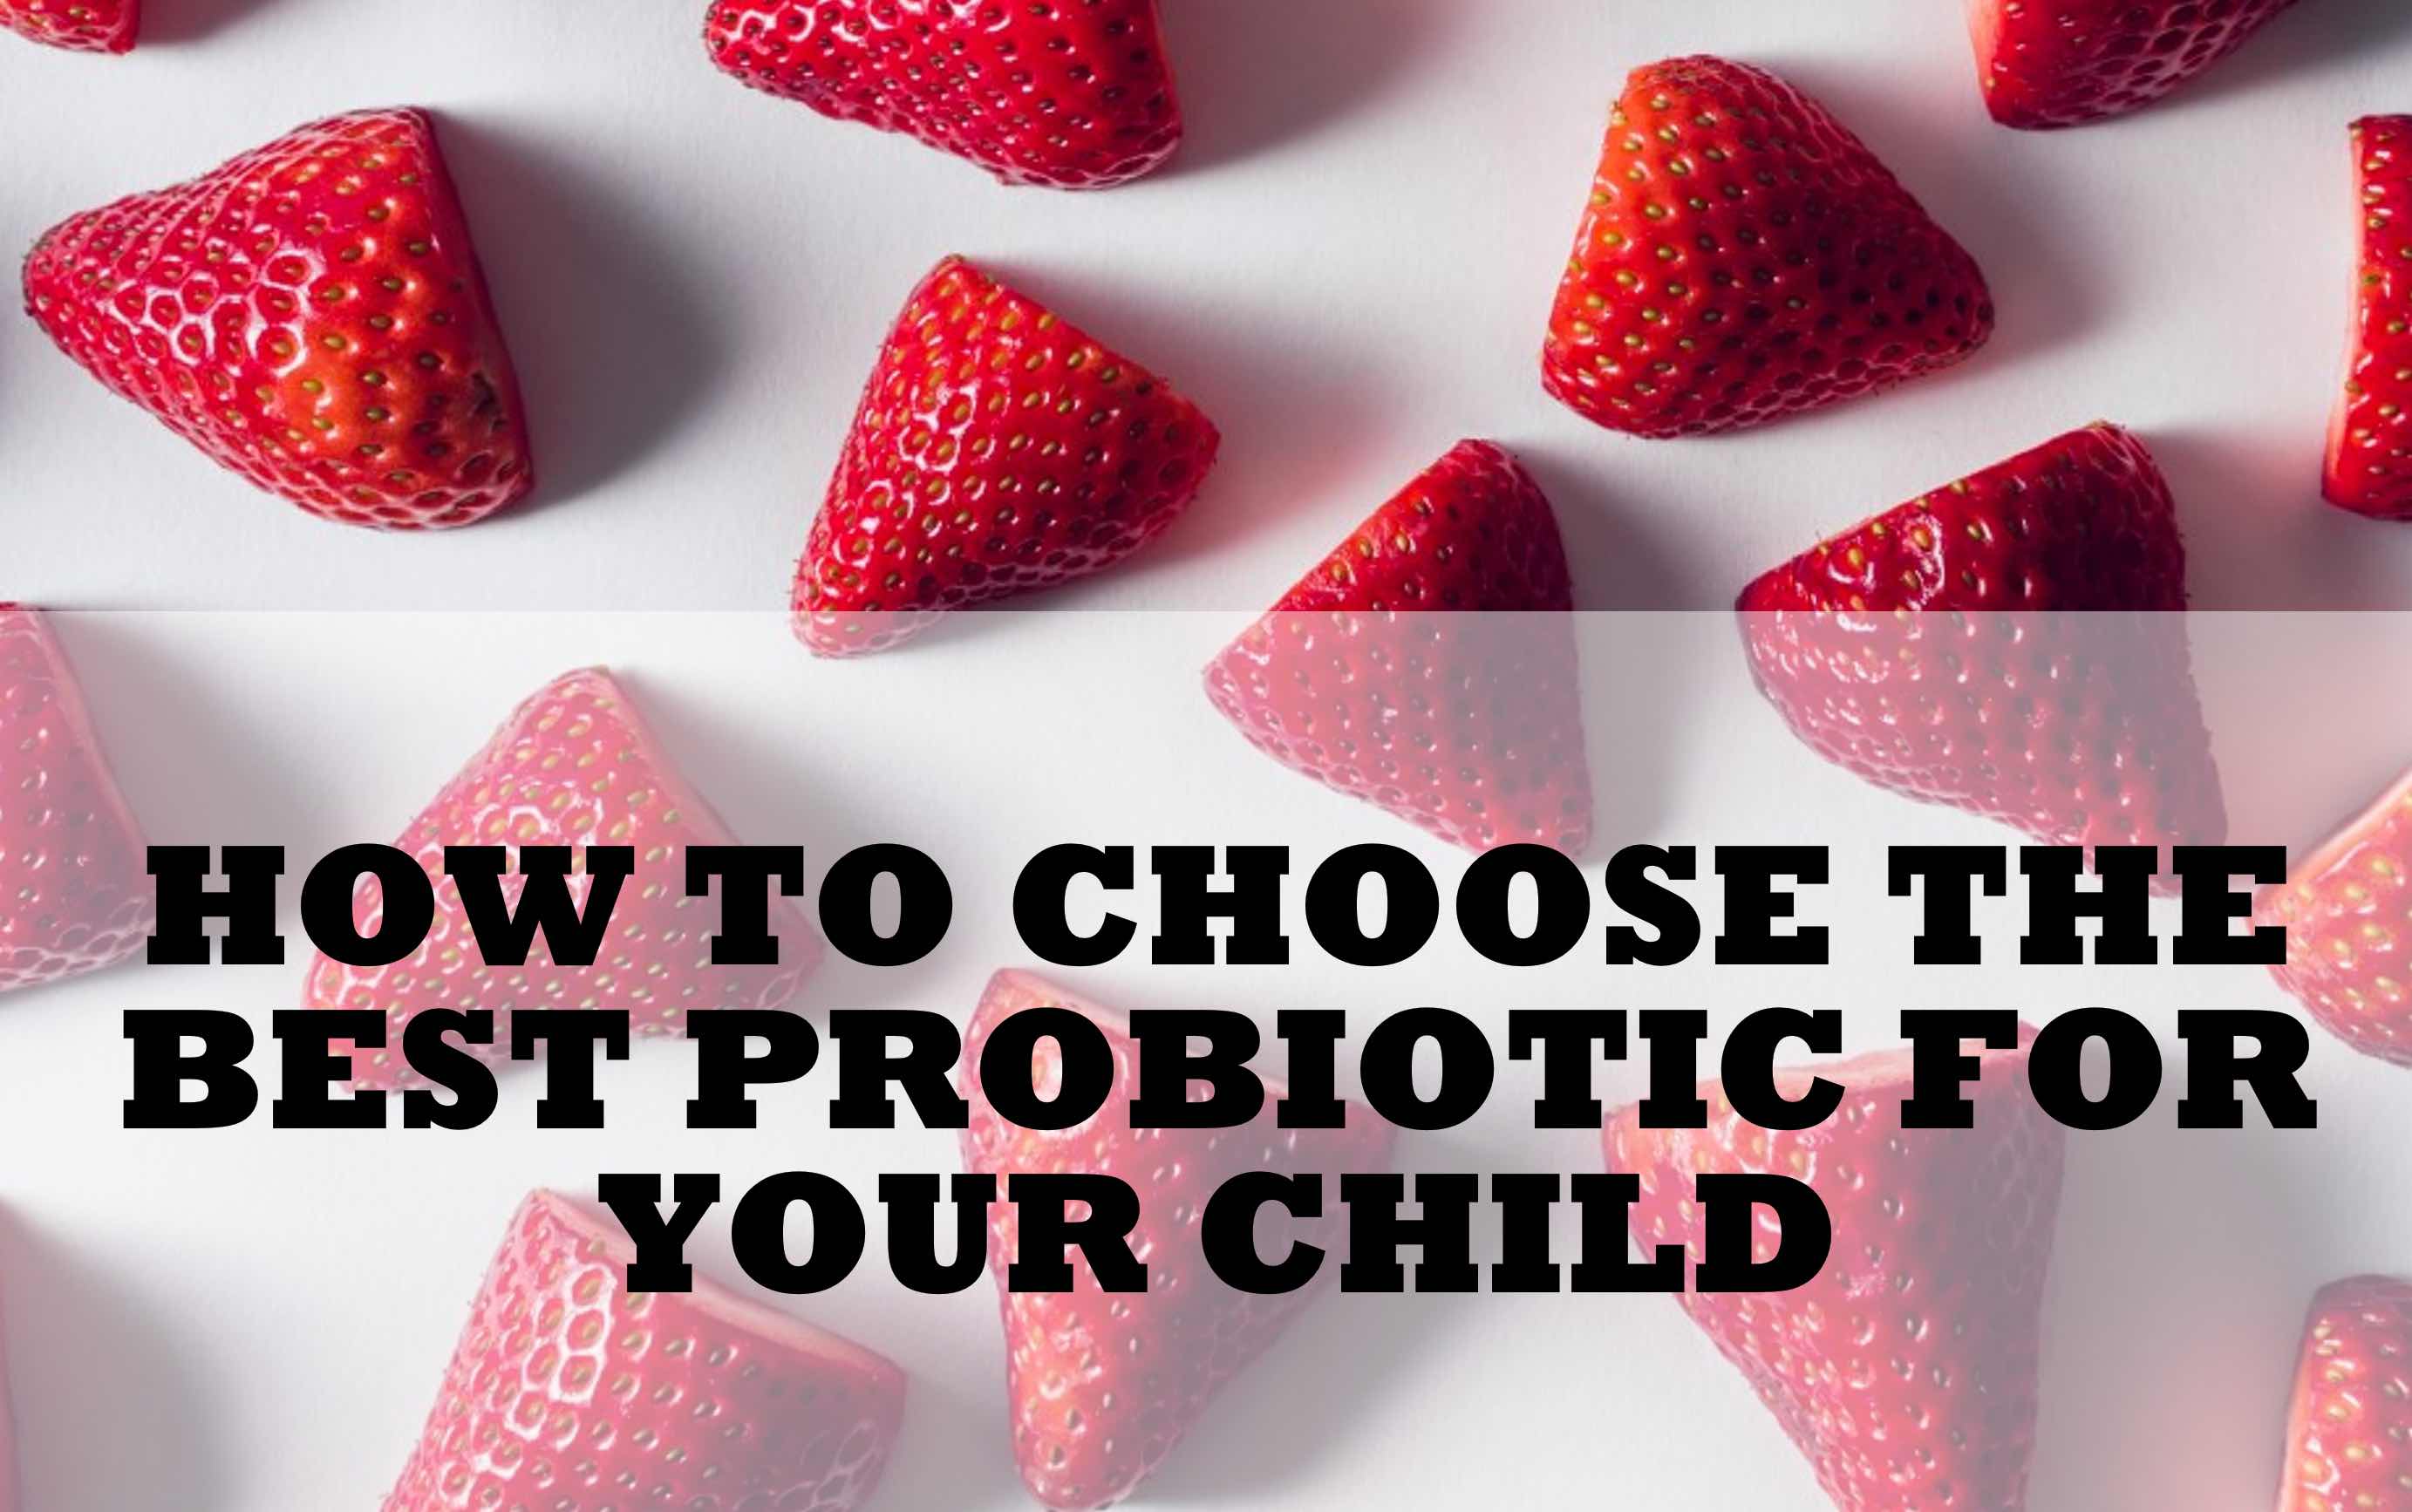 How to choose the best probiotic for your child - Naturopathic Pediatrics